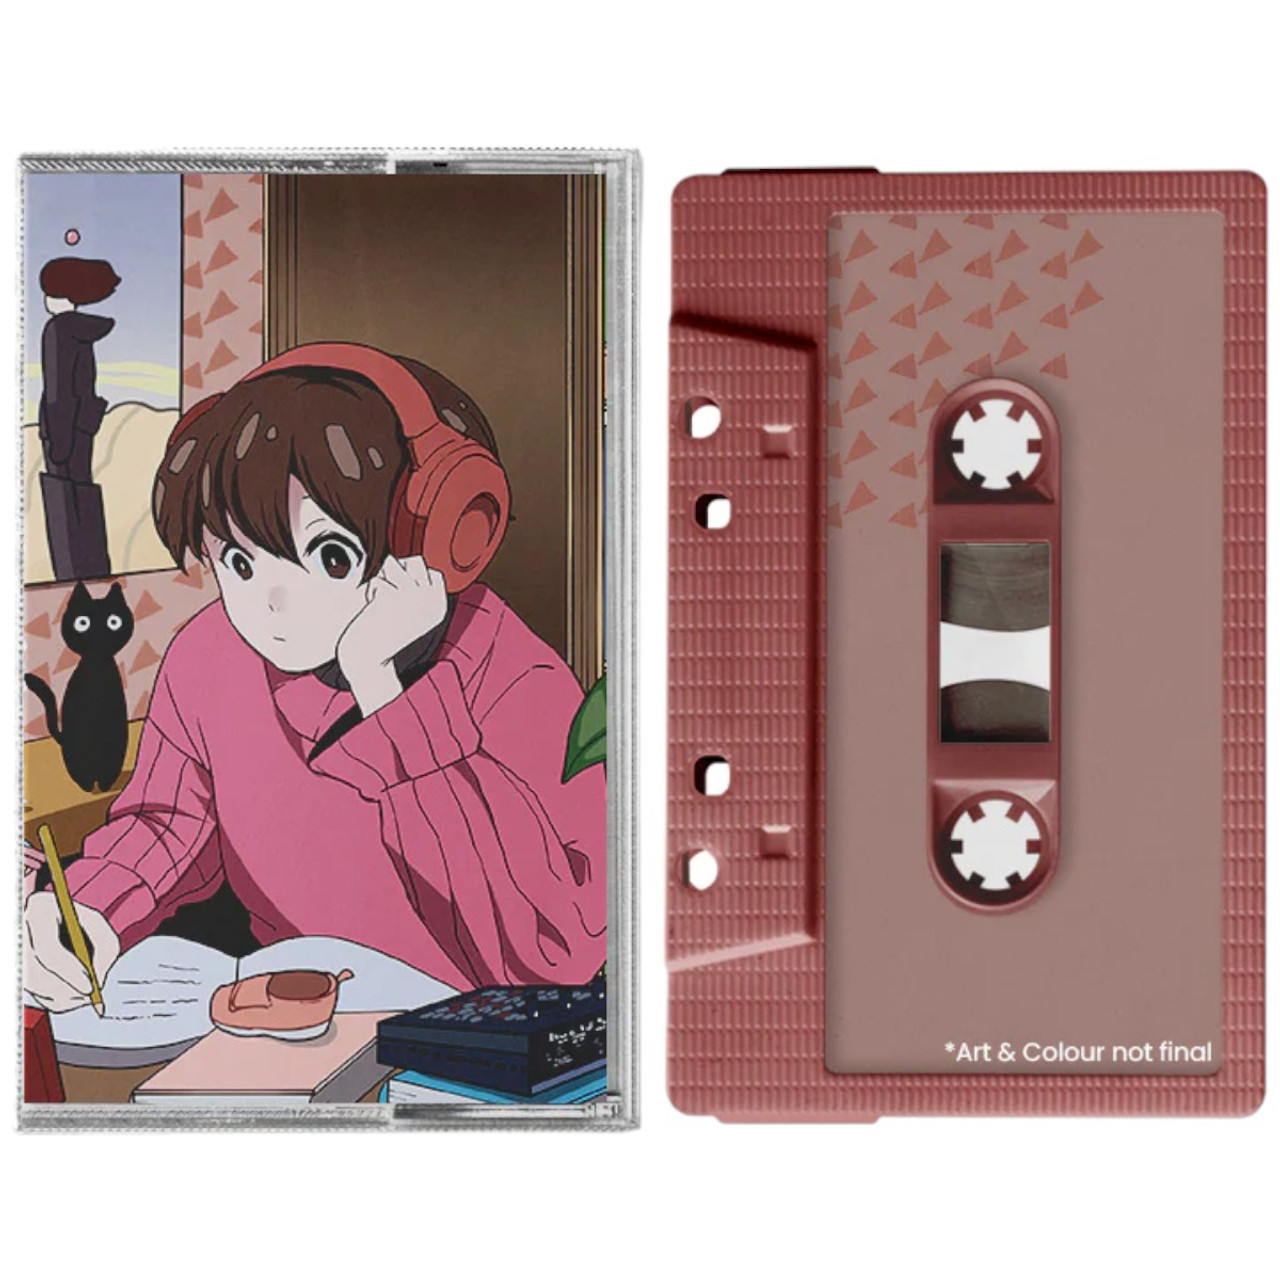 Grey October Sound – Lo-Fi Ghibli CASSETTE available at